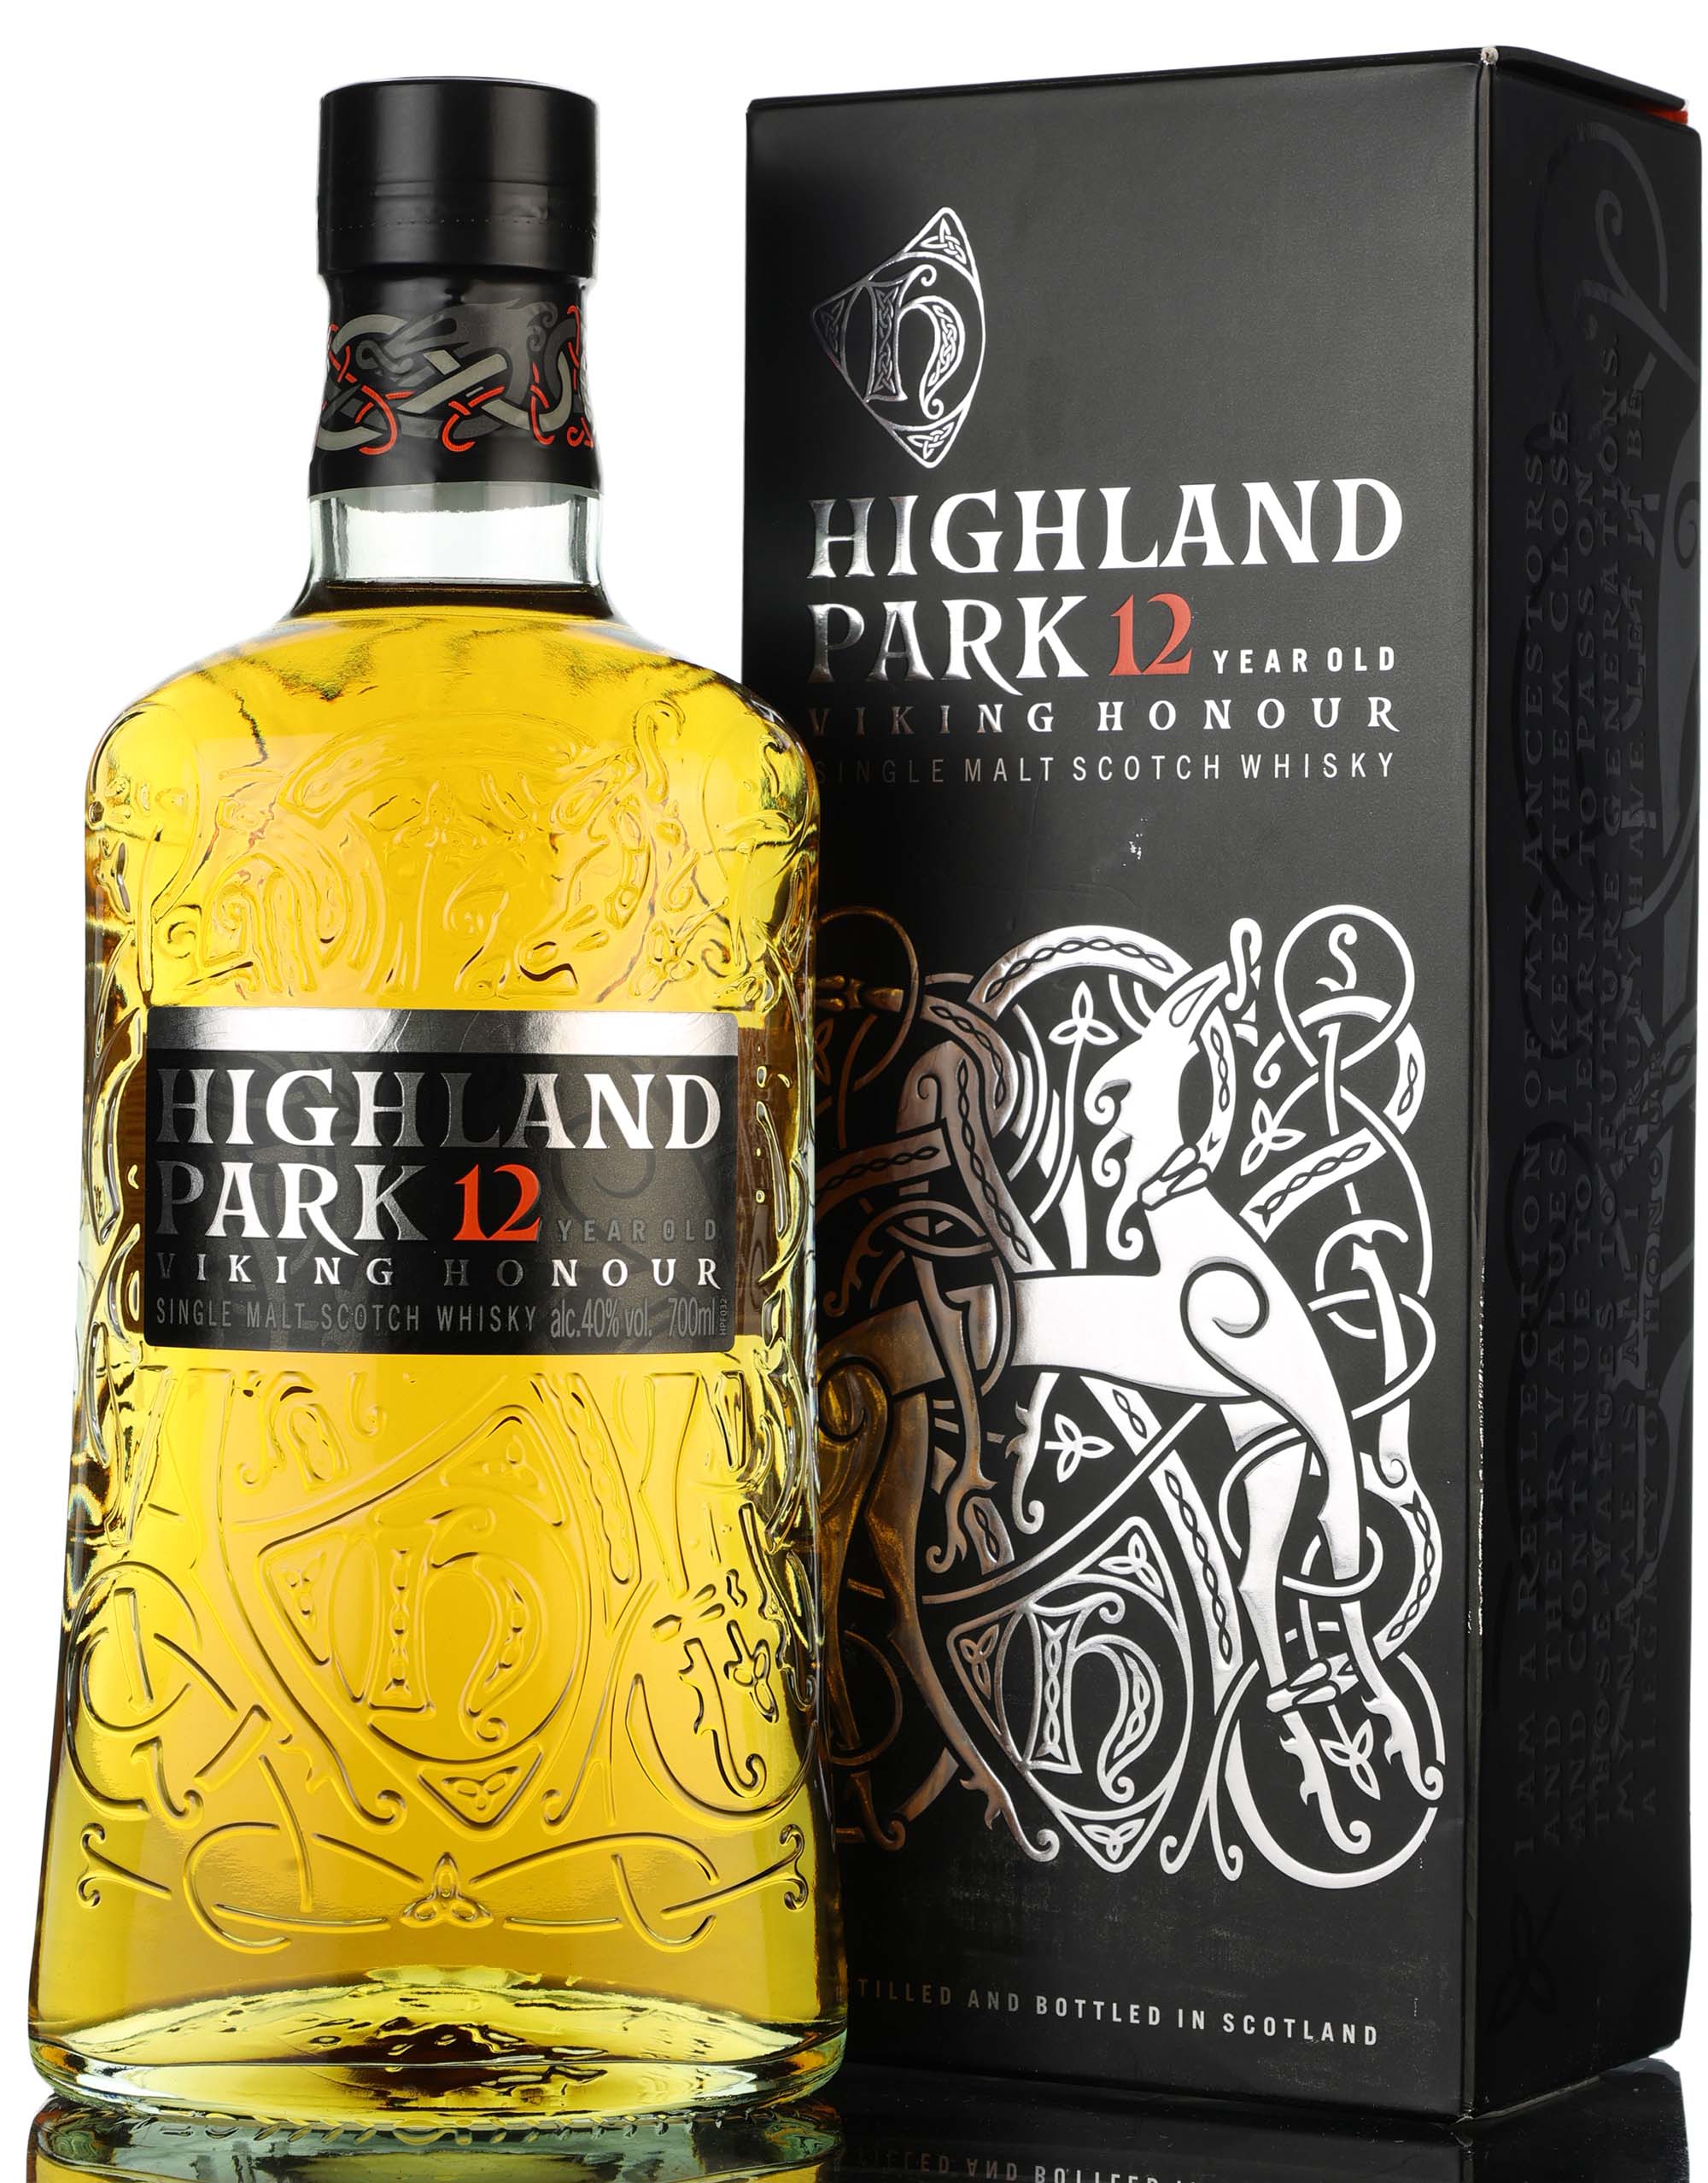 Highland Park 12 Year Old - Viking Honour - Late 2010s